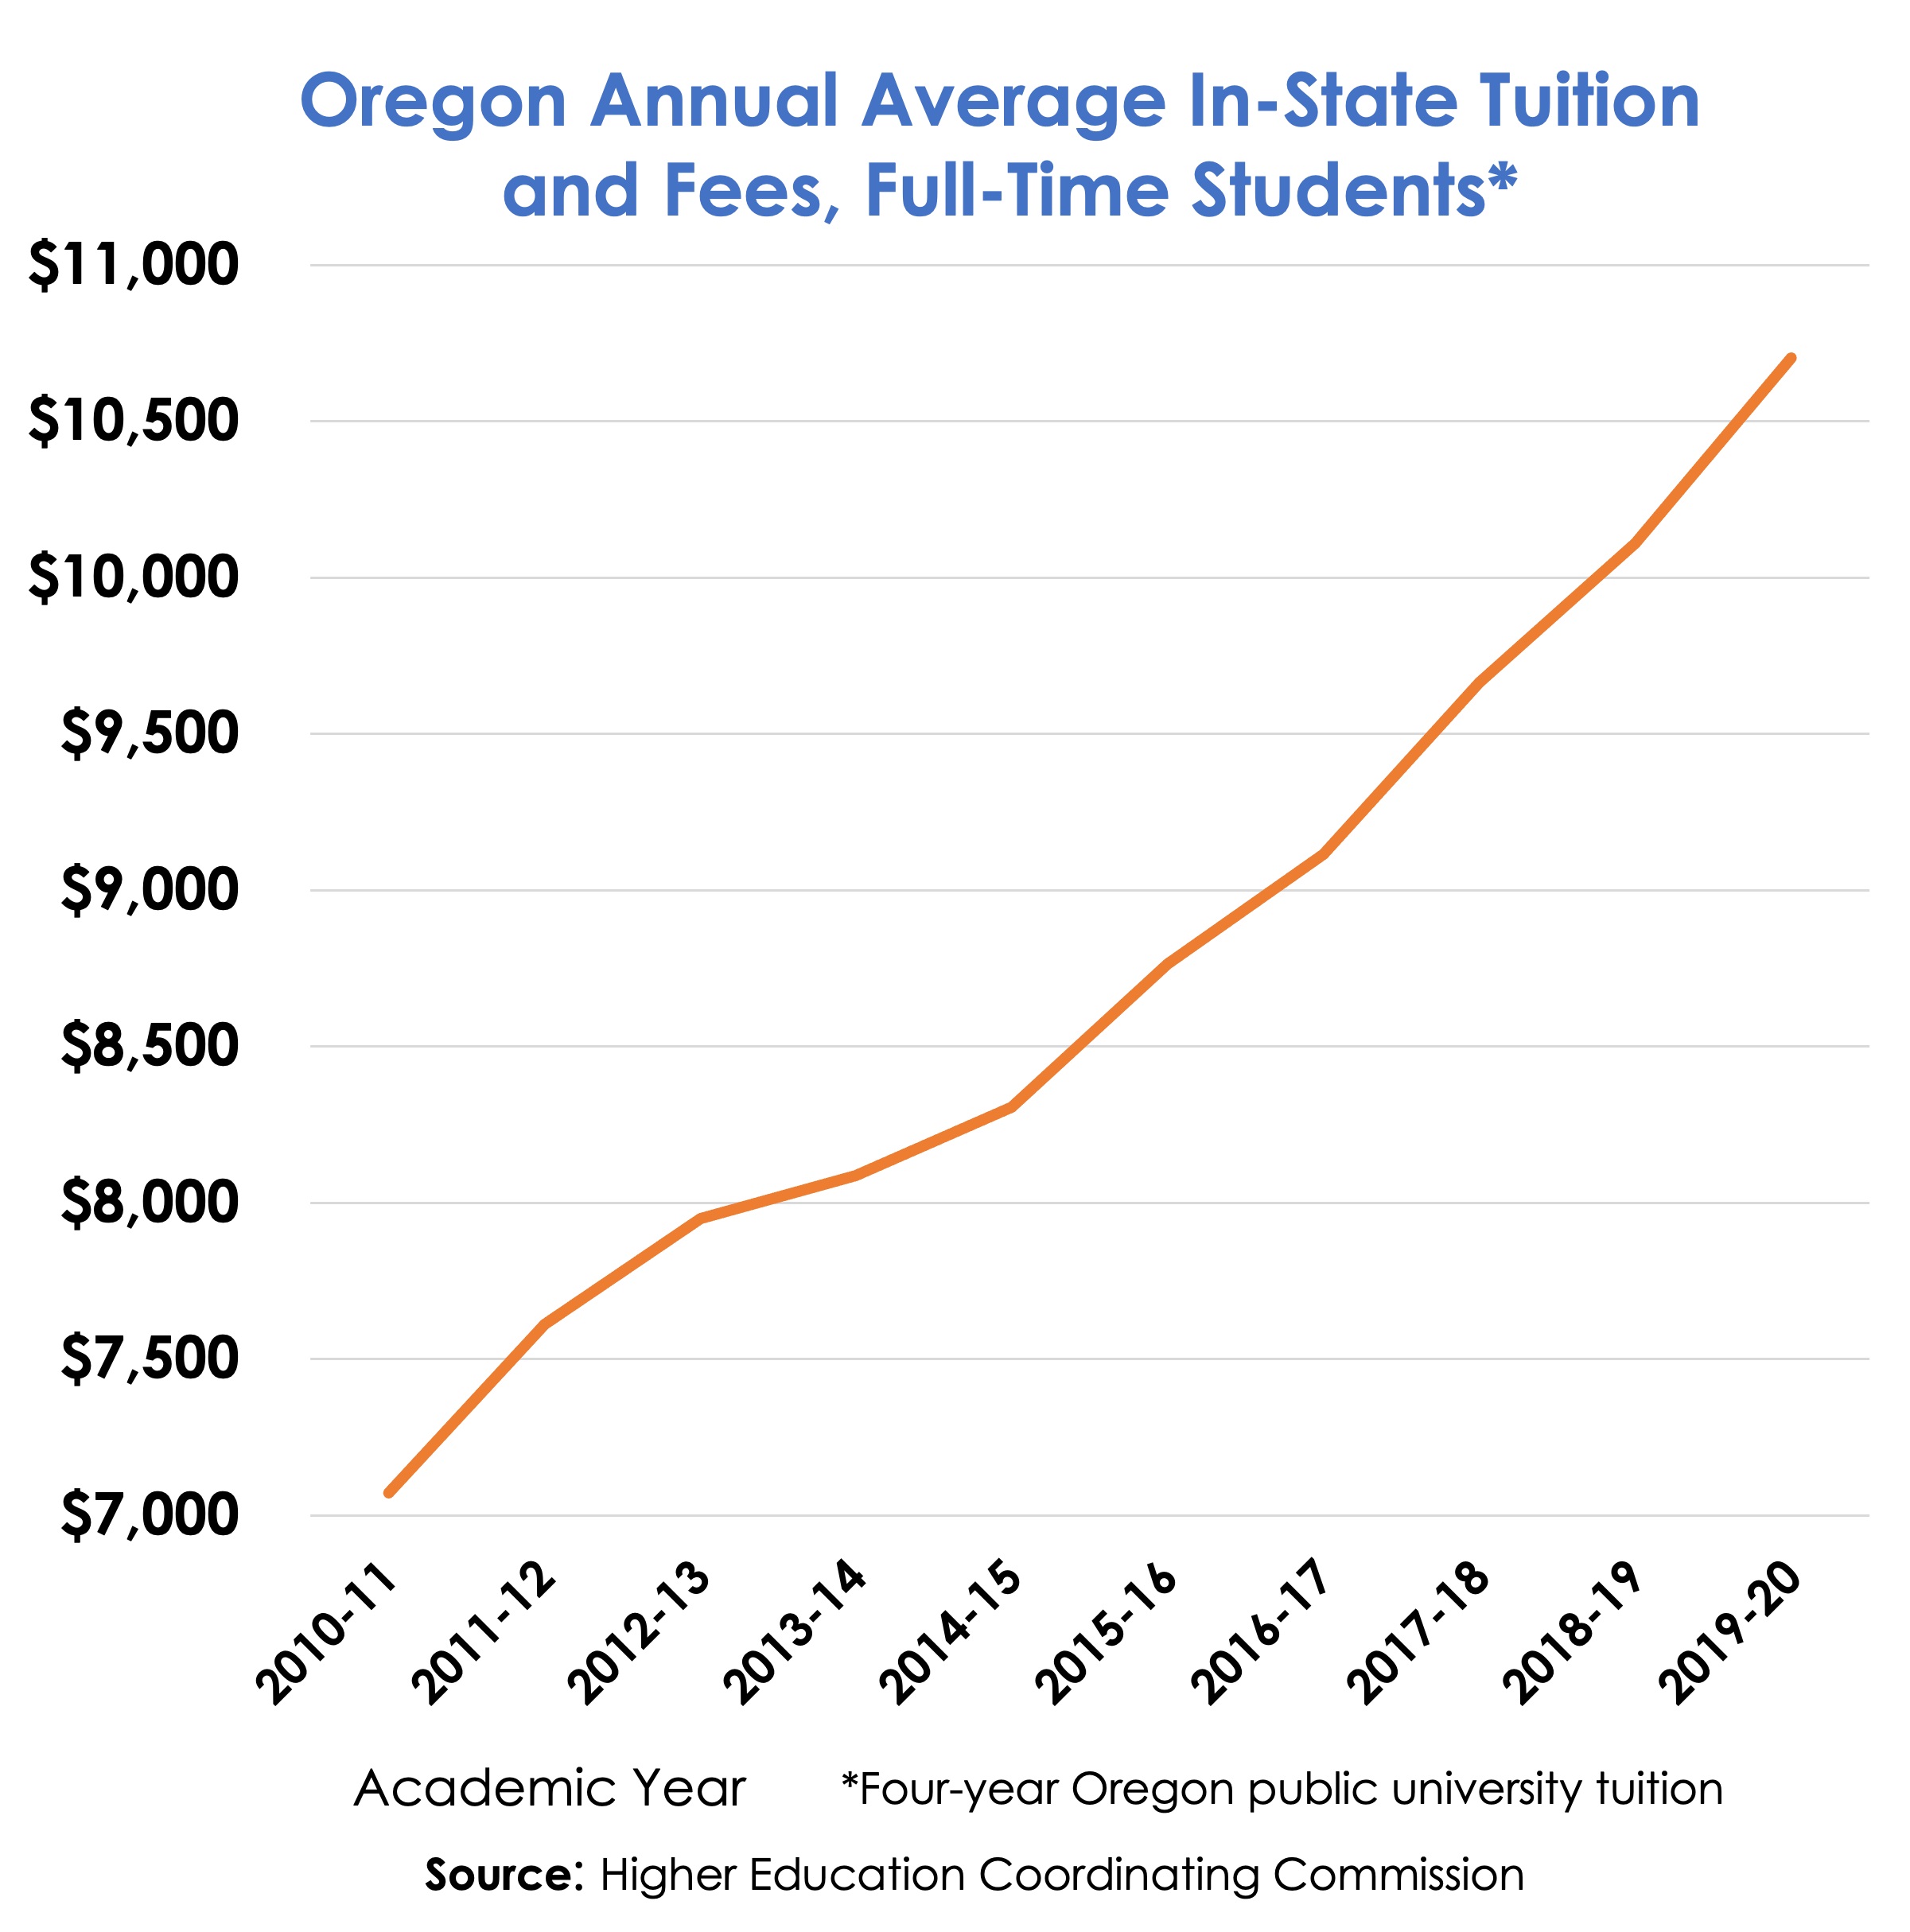 Chart shows Oregon Annual Average in-state tuition and fees for full time students is between 10,500 and 11,000 for 2019-20